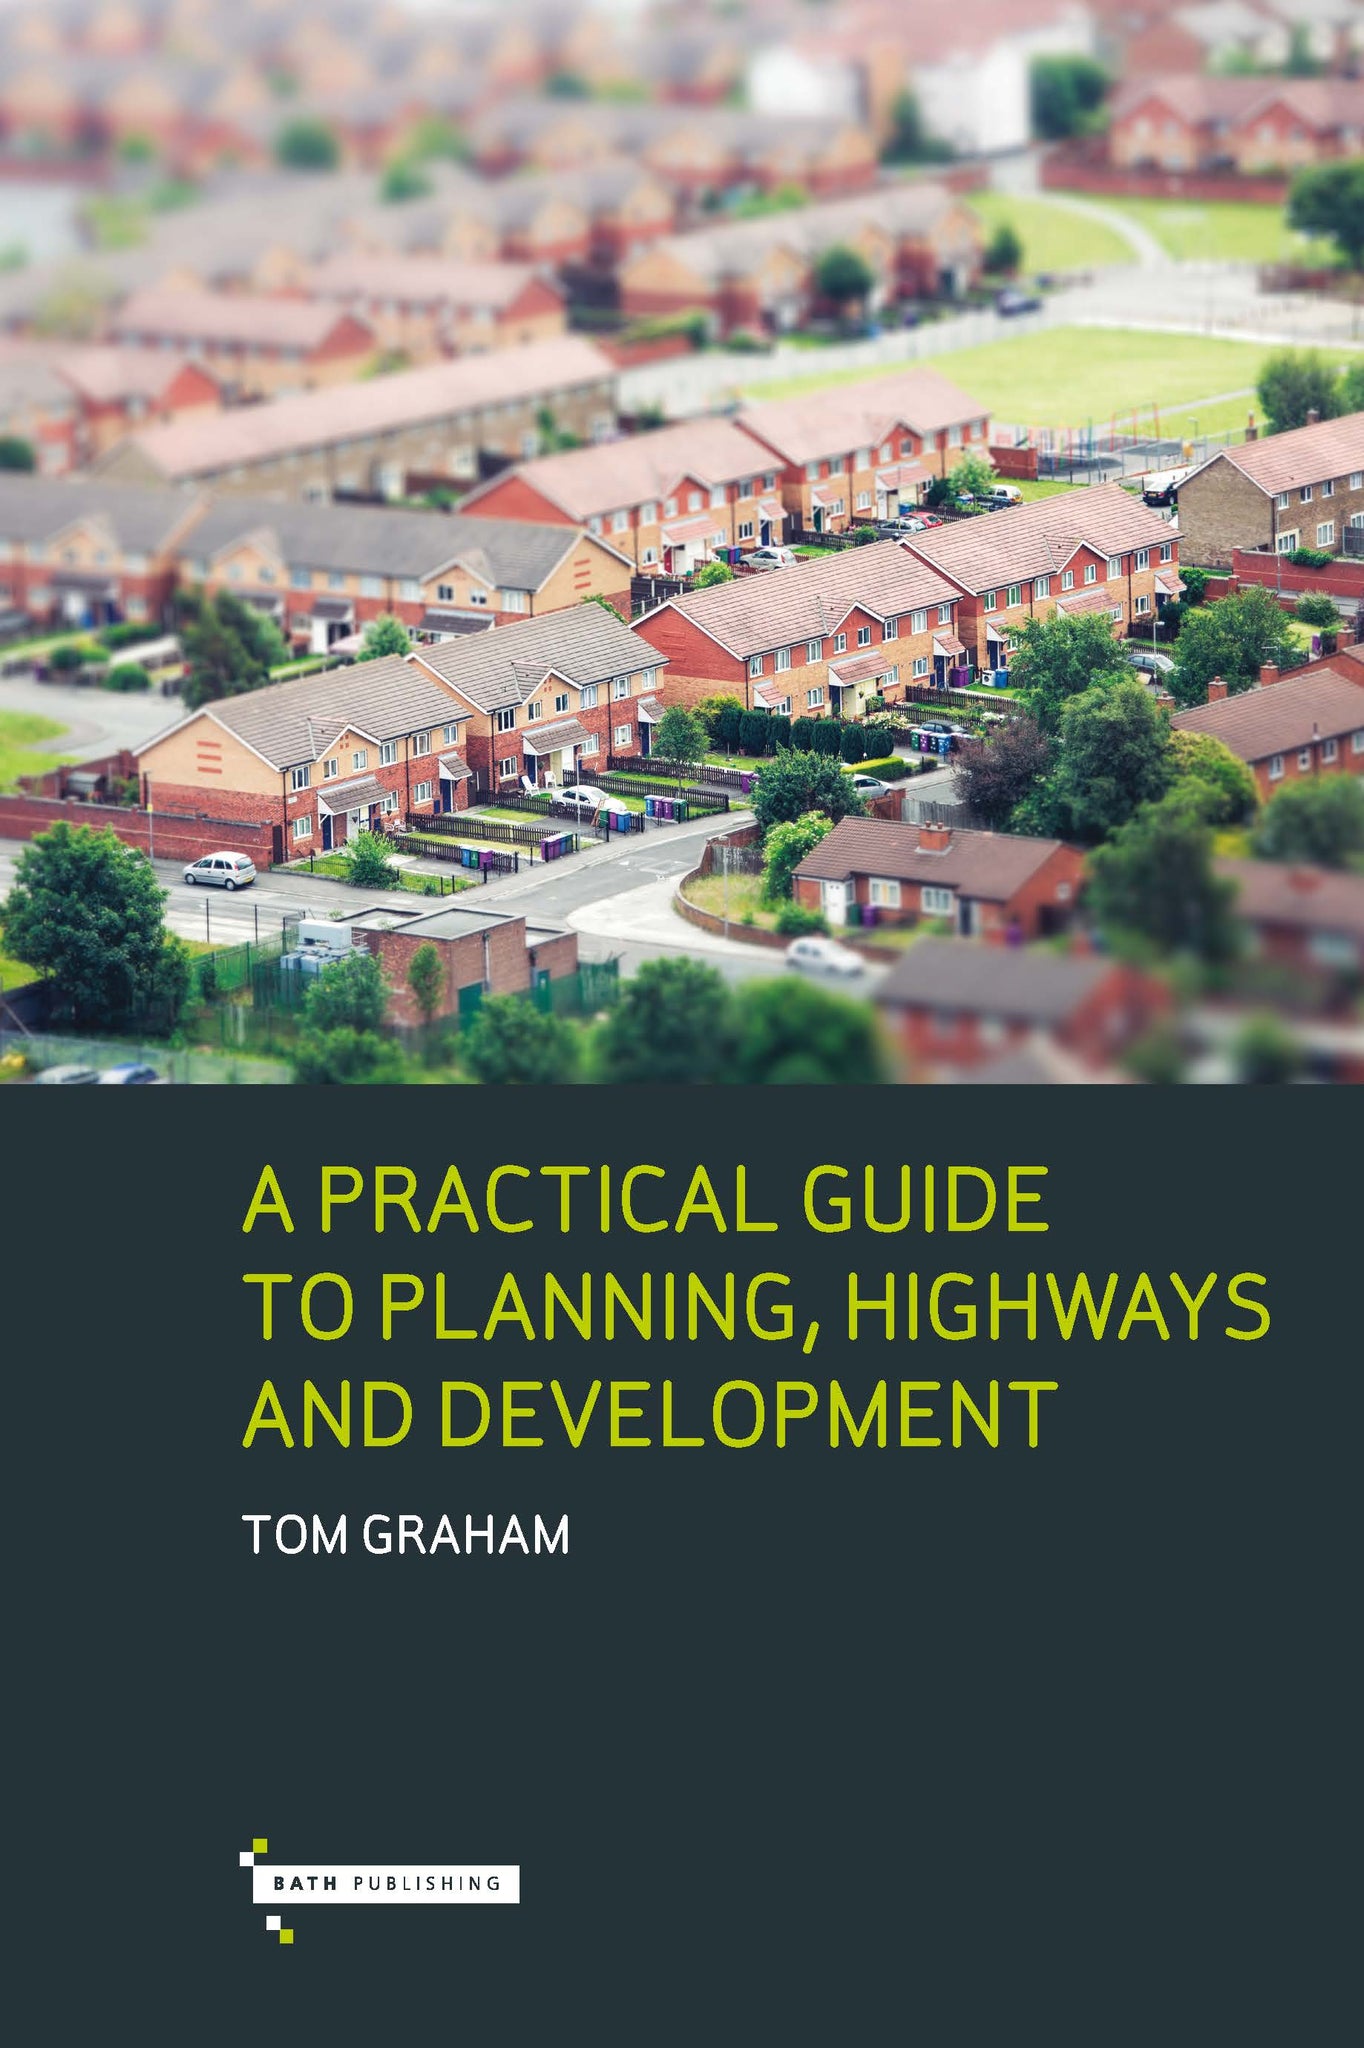 A Practical Guide To Planning, Highways And Development